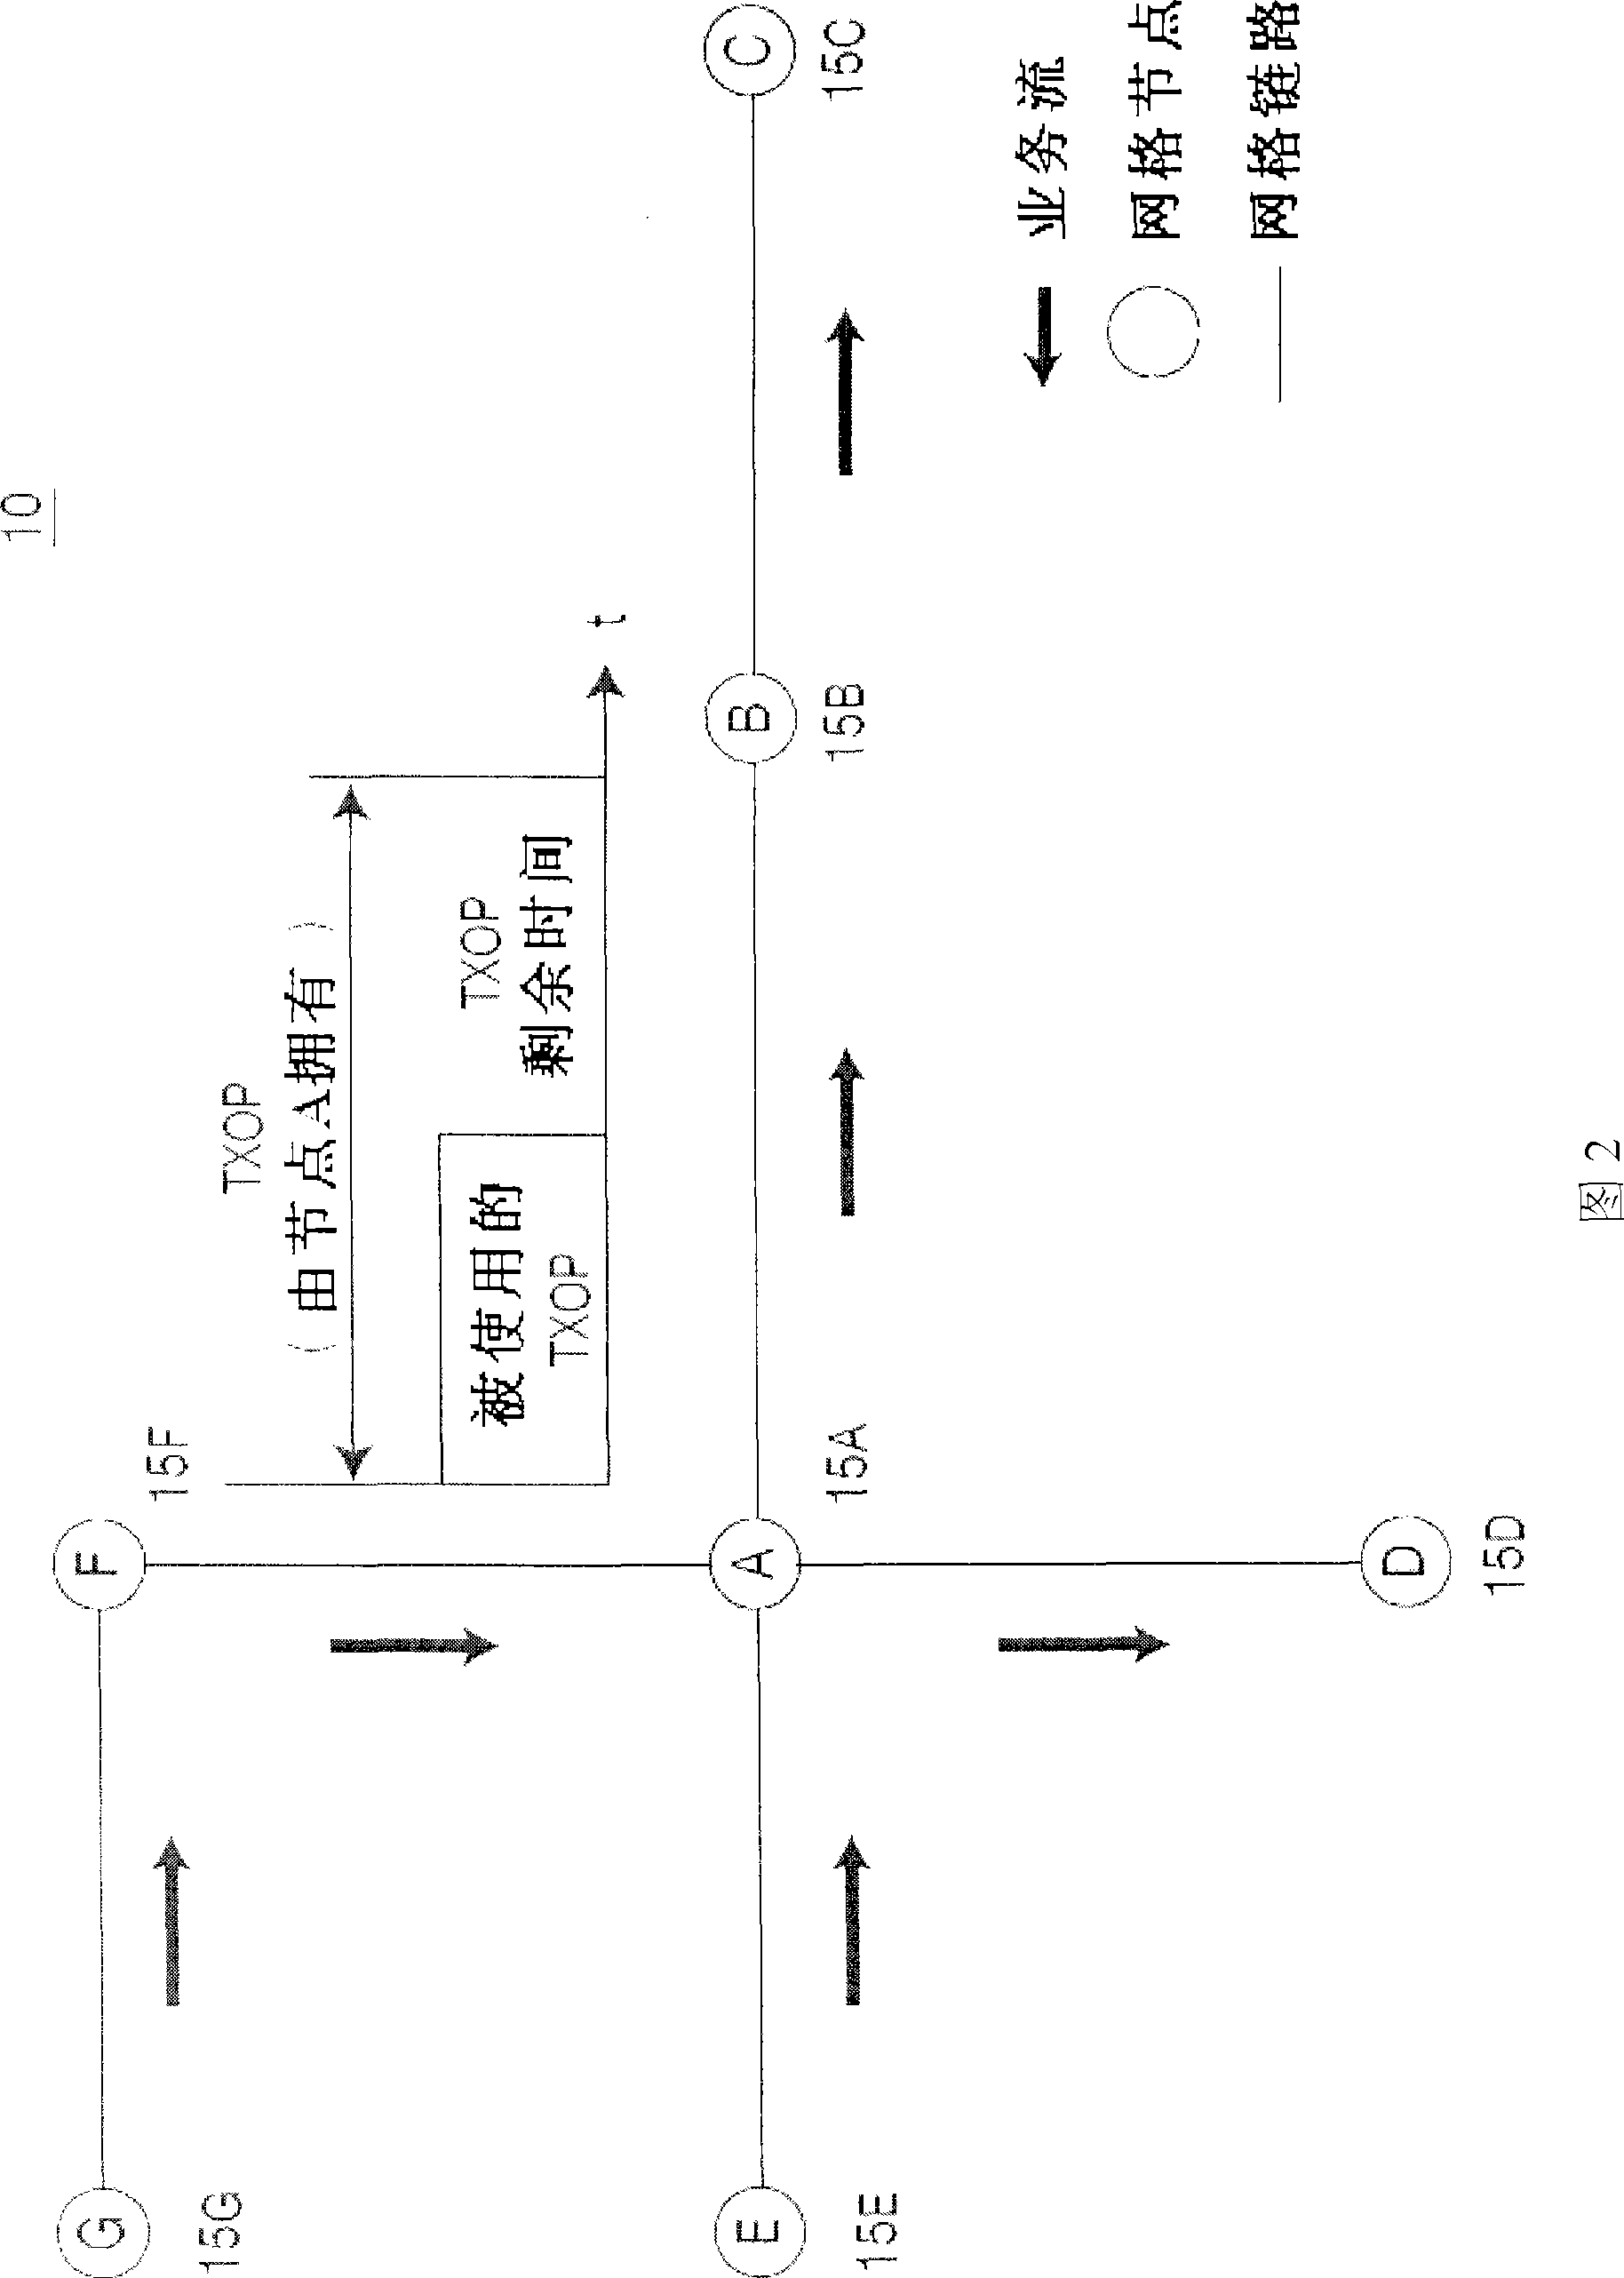 Method and signaling procedure for transmission opportunity usage in a wireless mesh network